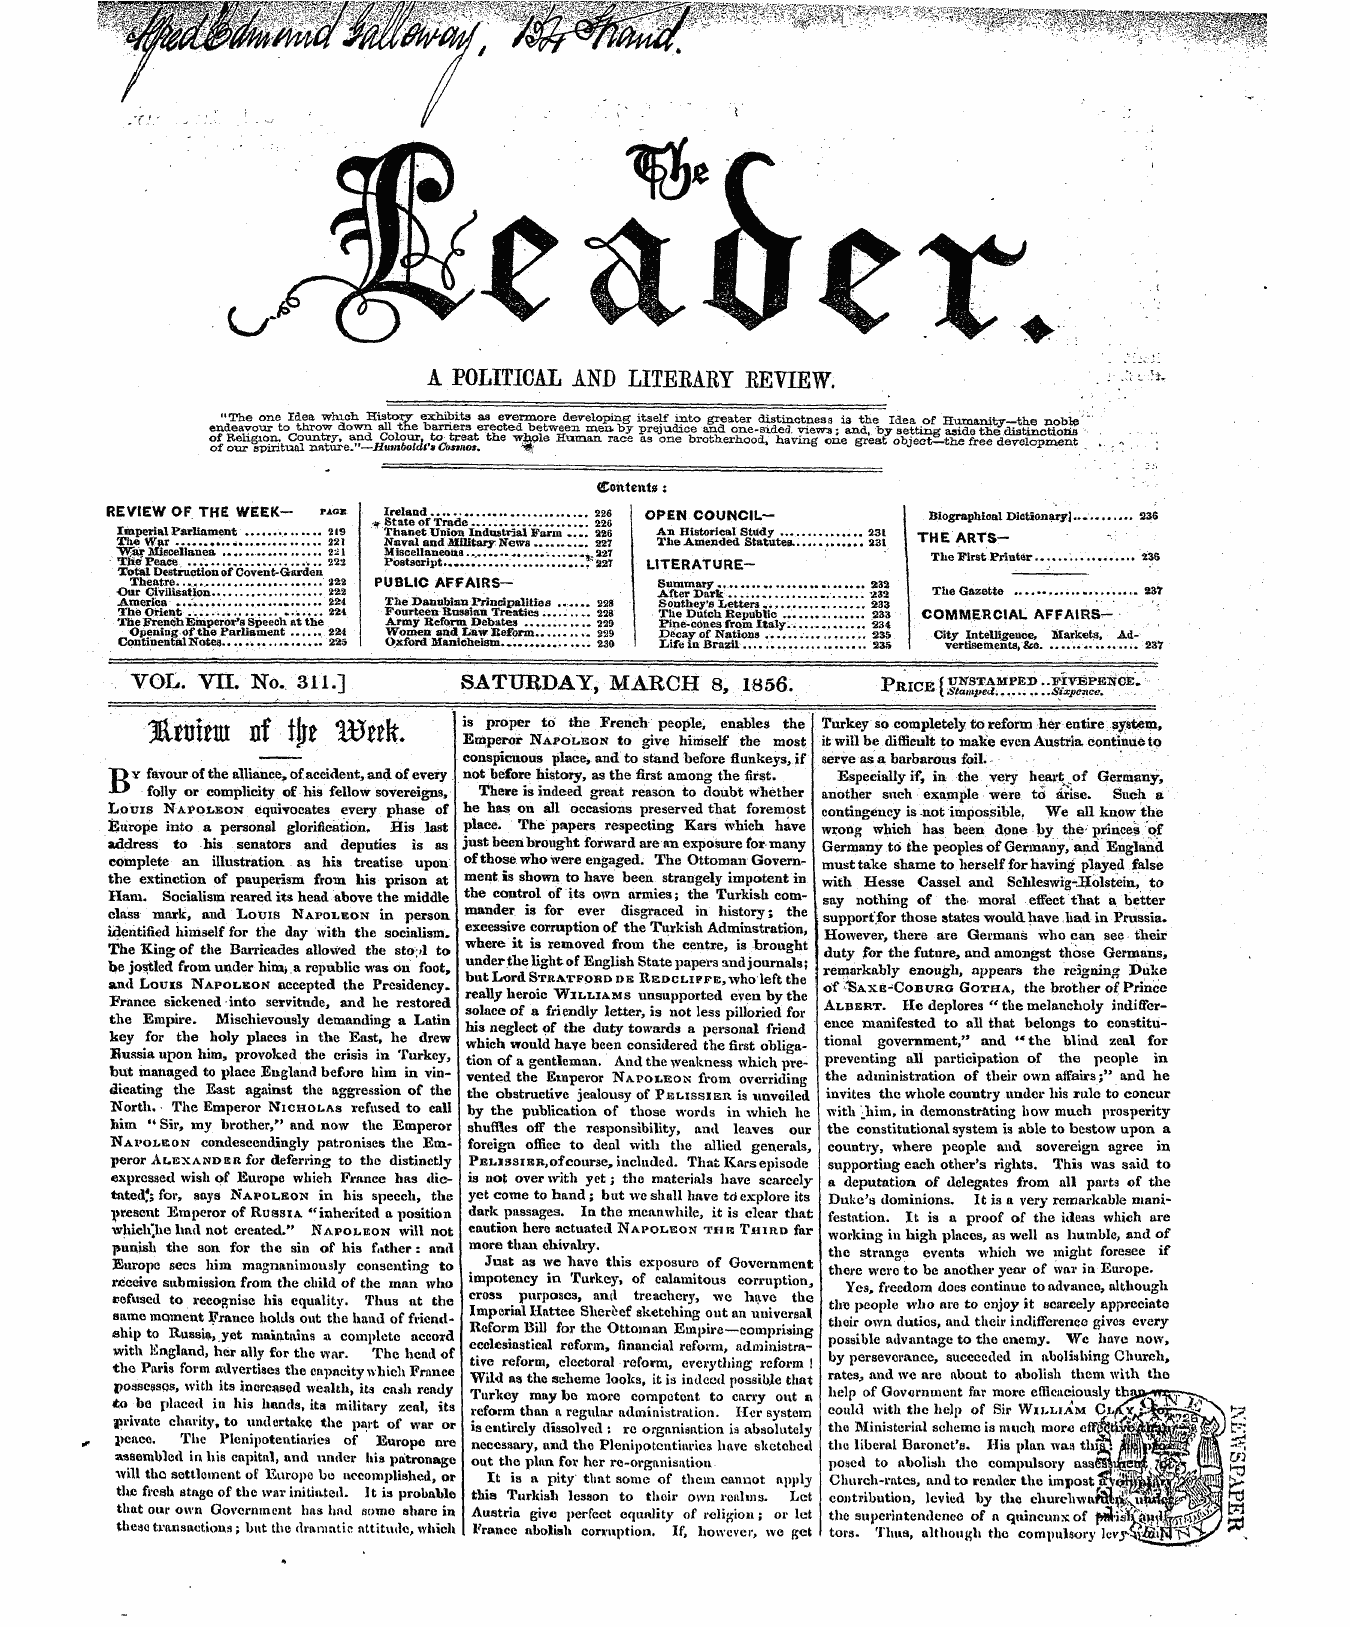 Leader (1850-1860): jS F Y, 2nd edition - "The One Idea Which History- Exhibits As...